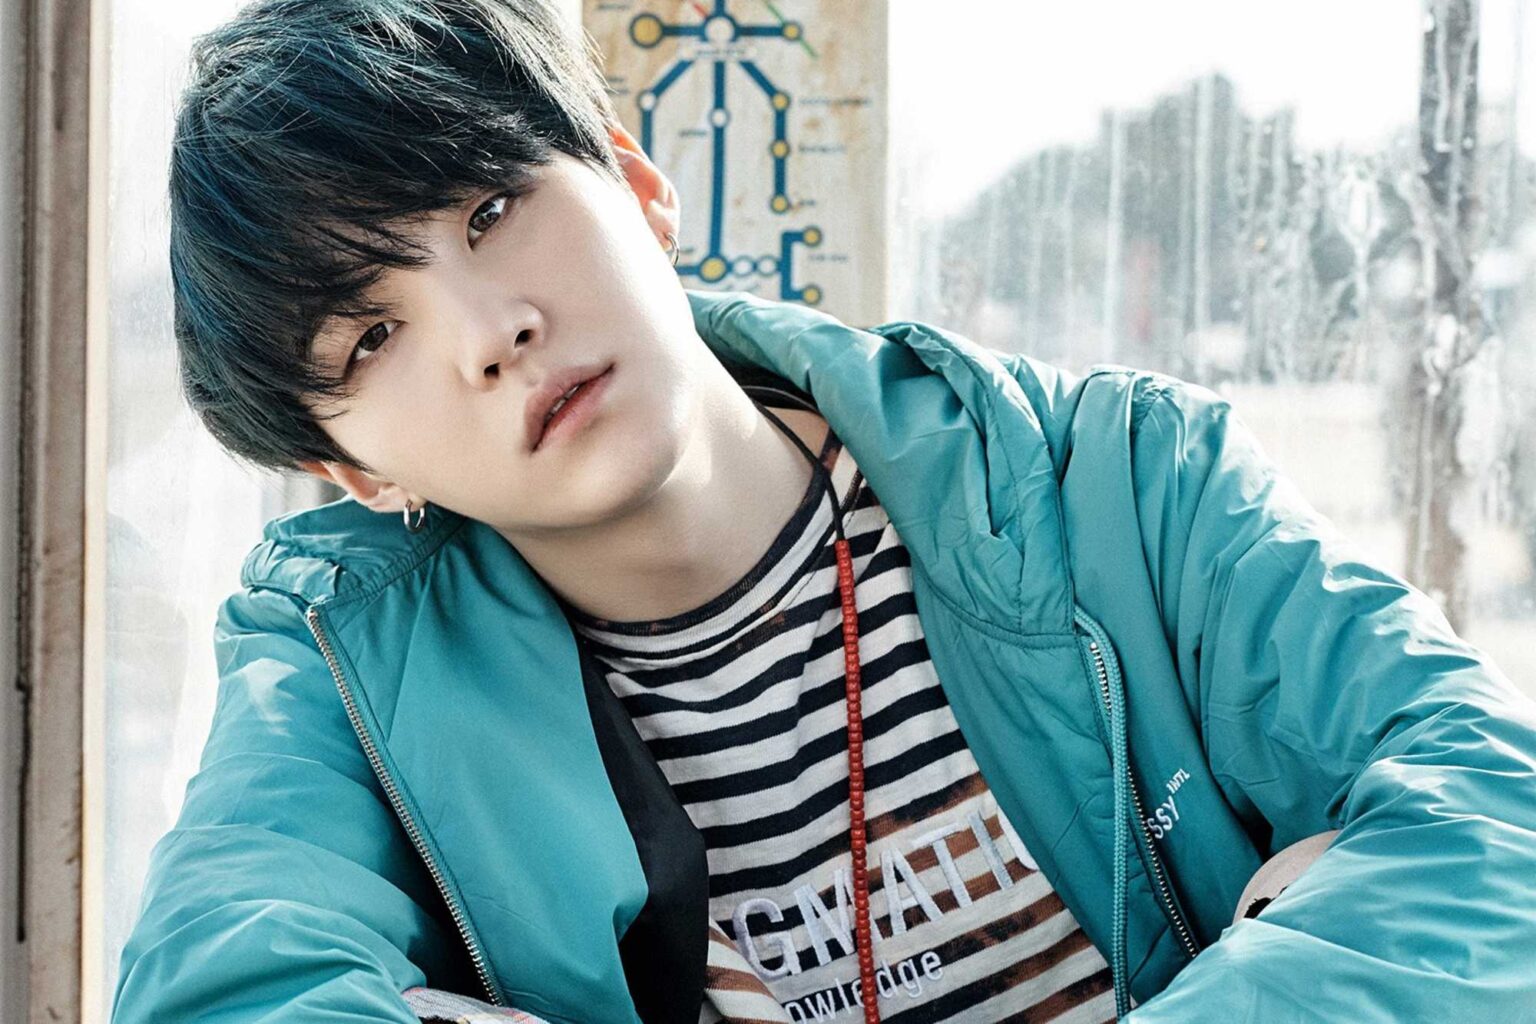 Suga is the most outspoken member of BTS. Learn more about the rapper’s past and his passions outside of the group.